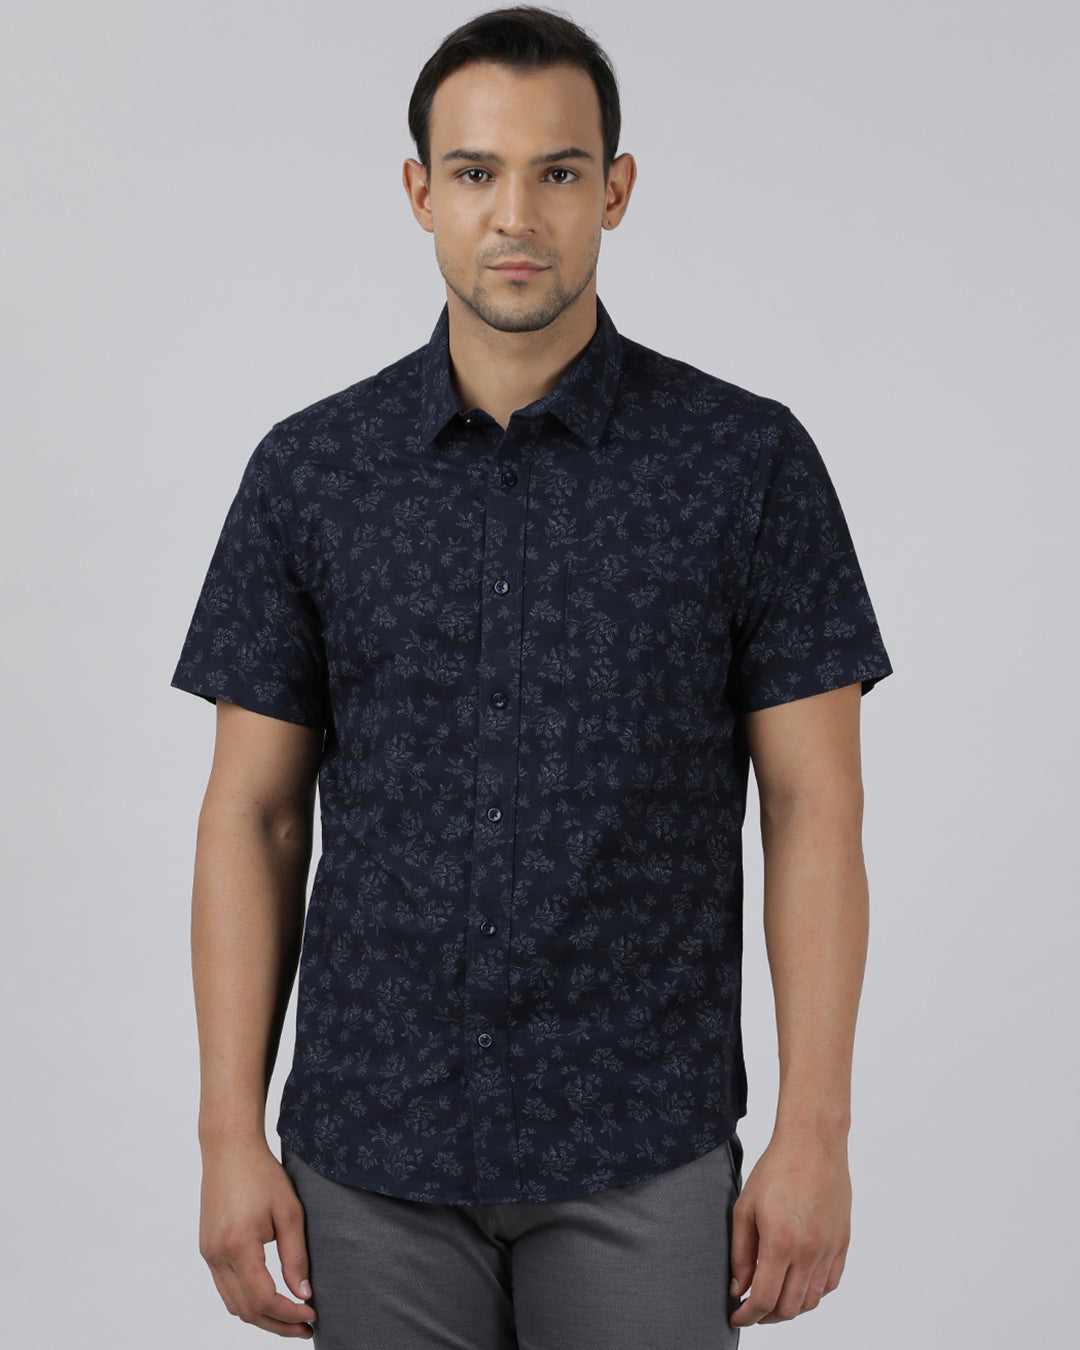 Casual Navy Half Sleeve Regular Fit Print Shirt with Collar for Men